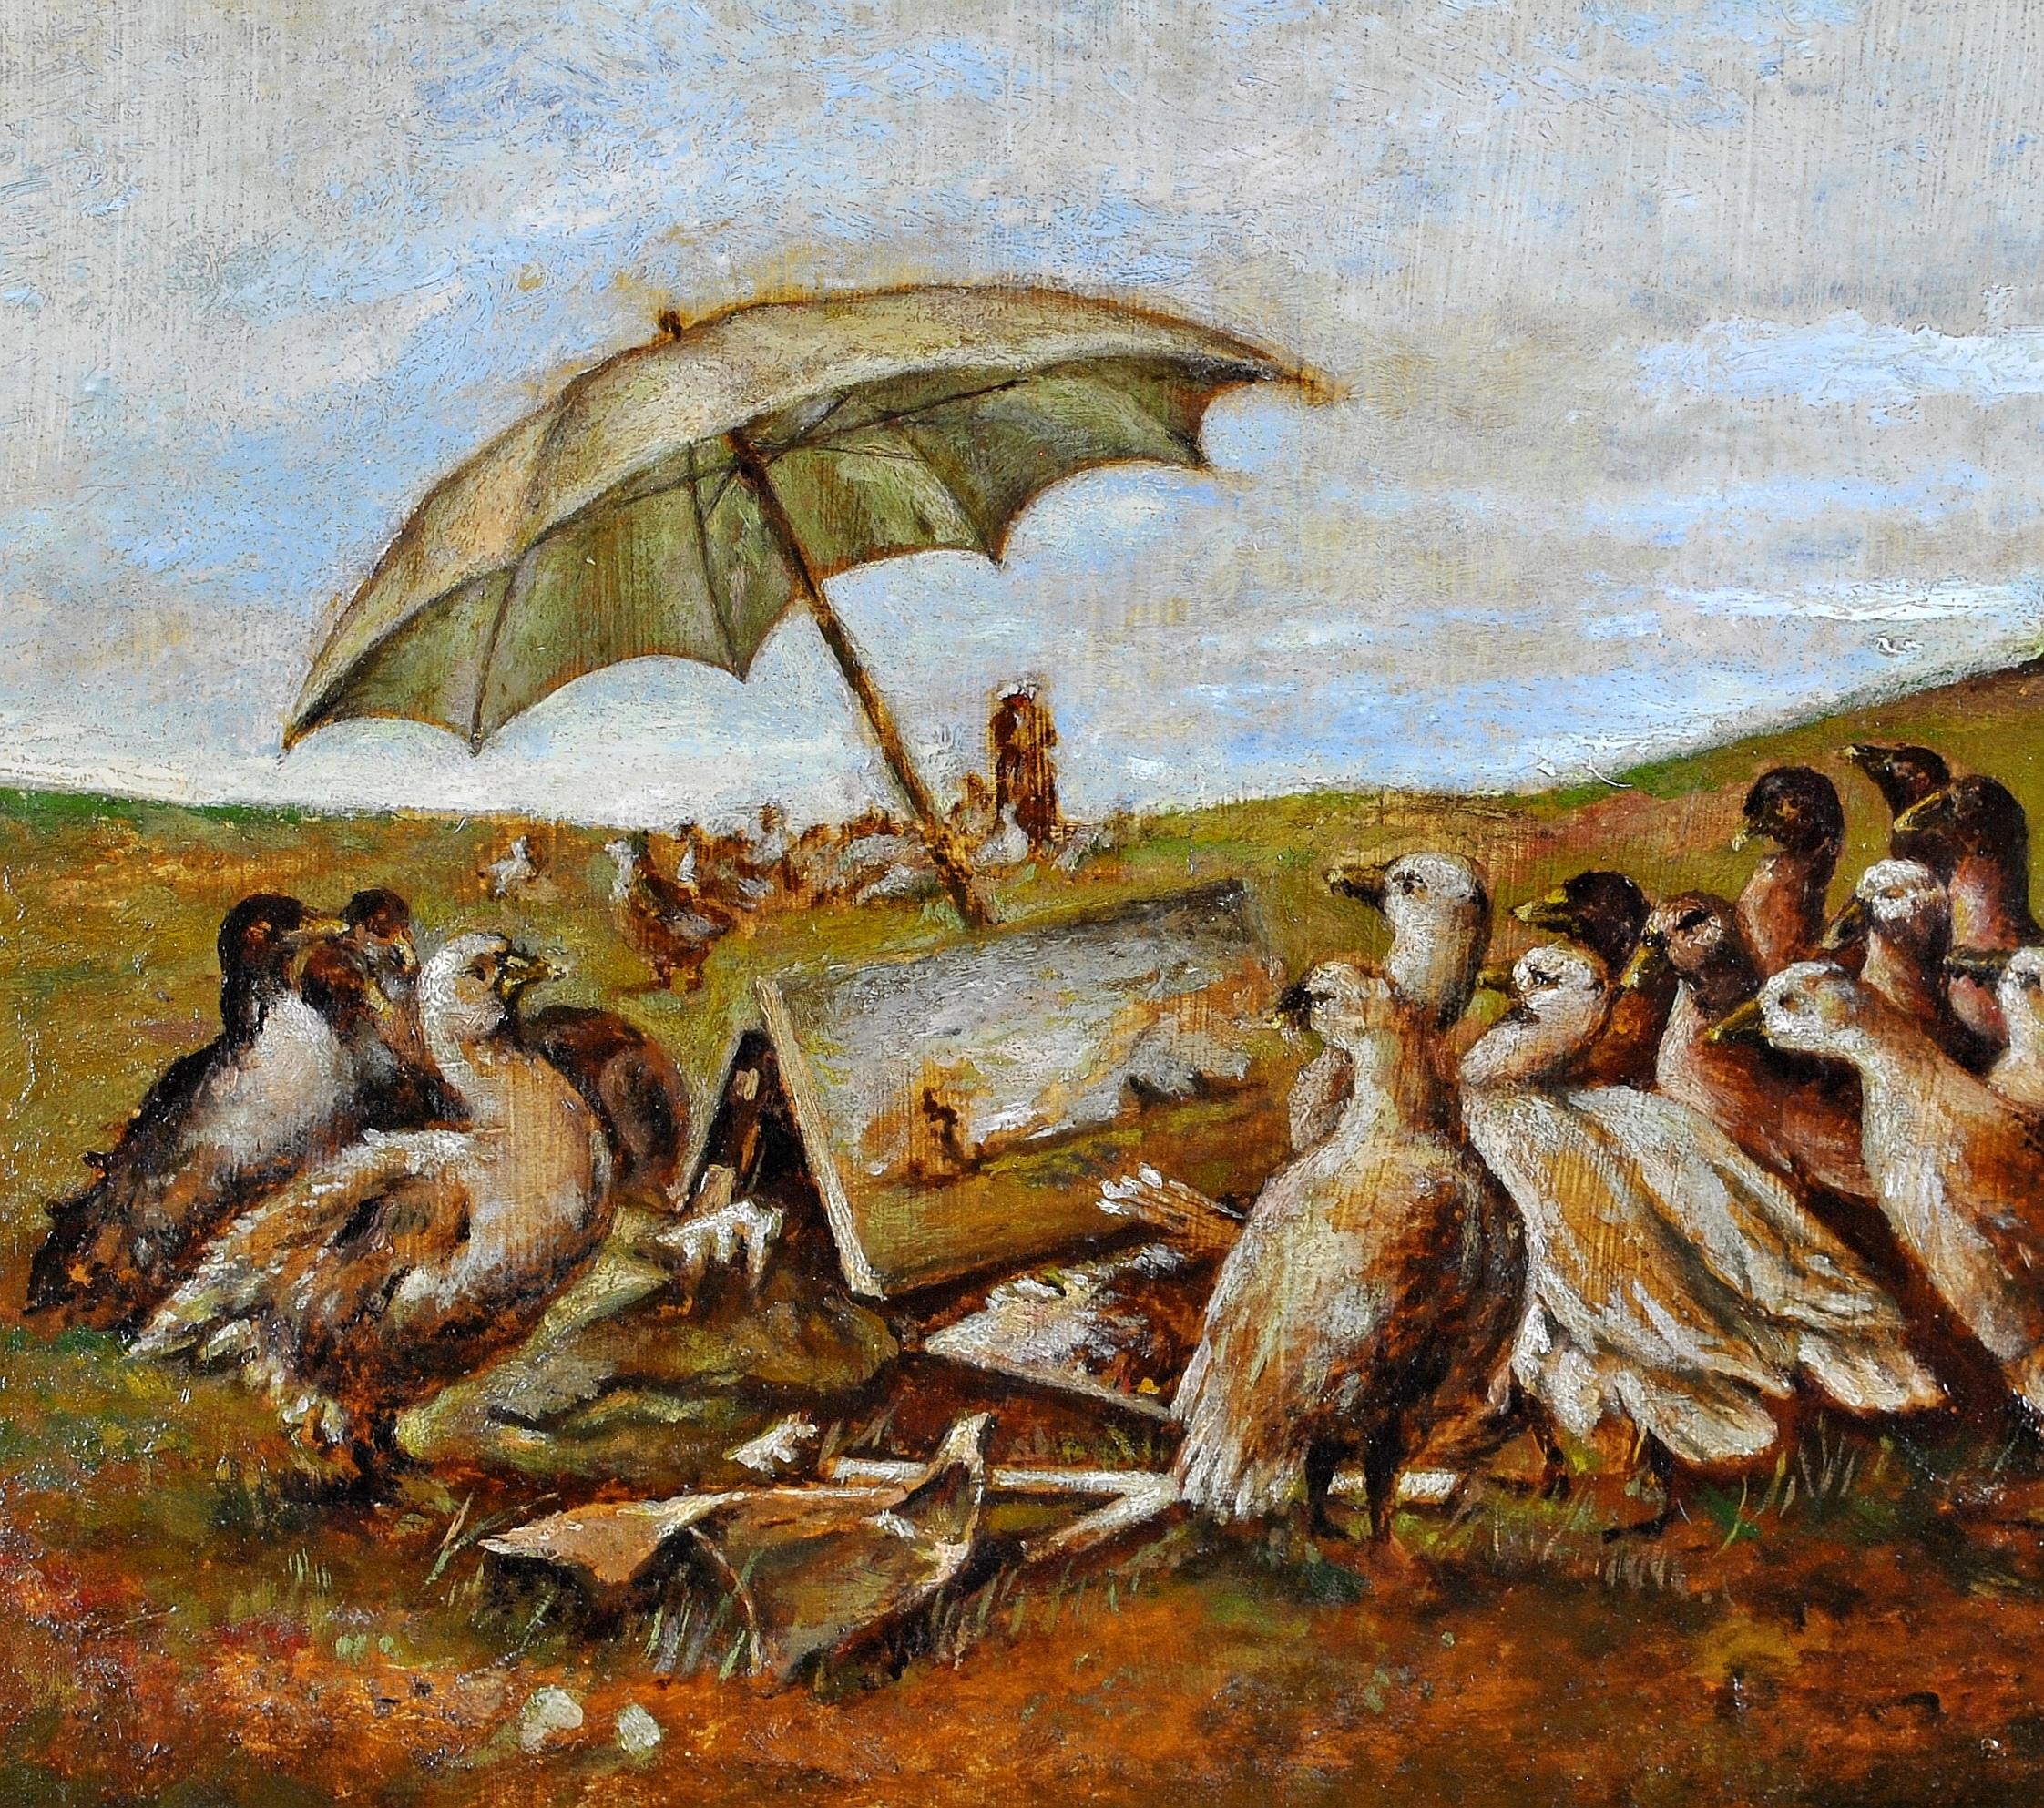 Geese Admiring a Painting - Early 20th Century French Antique Oil Painting - Gray Animal Painting by Early 20th Century French School